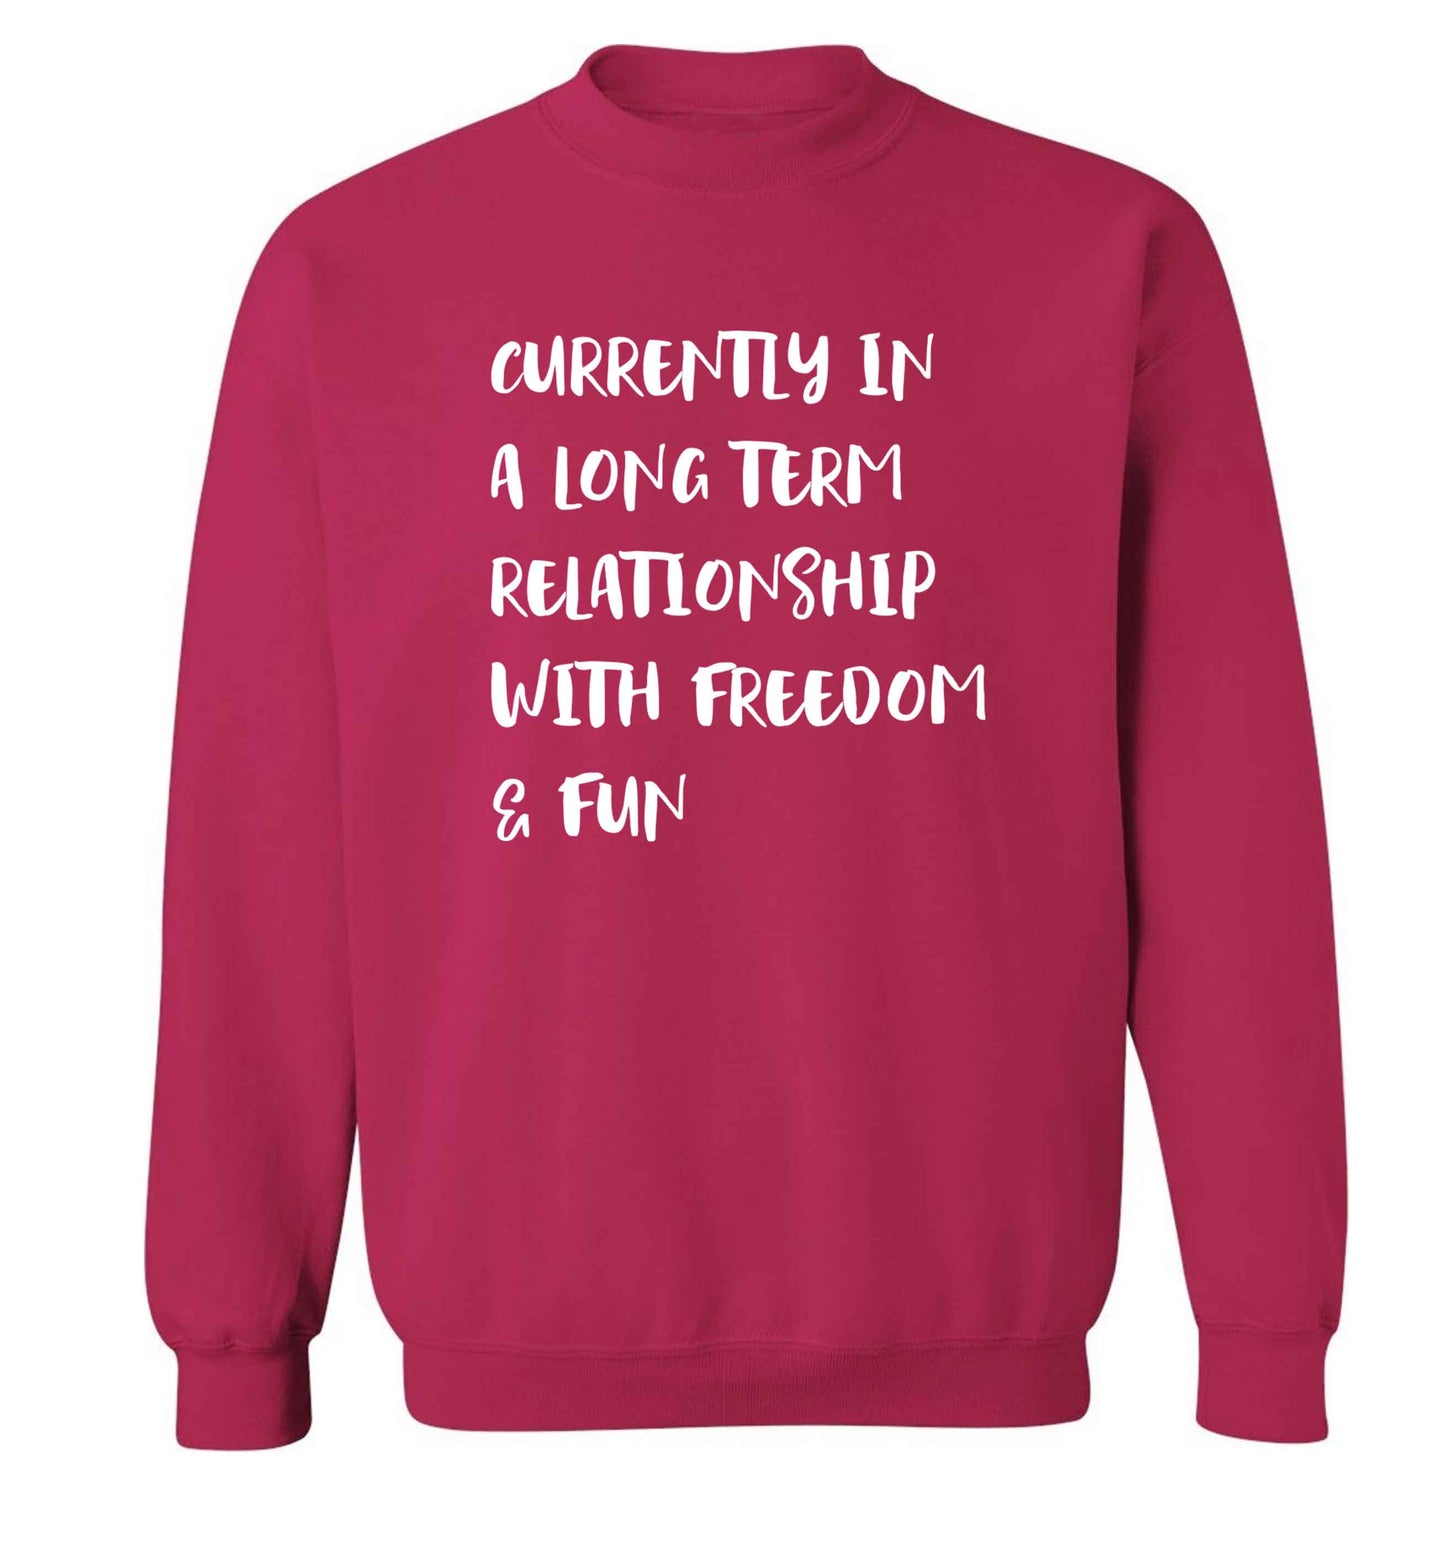 Currently in a long term relationship with freedom and fun adult's unisex pink sweater 2XL